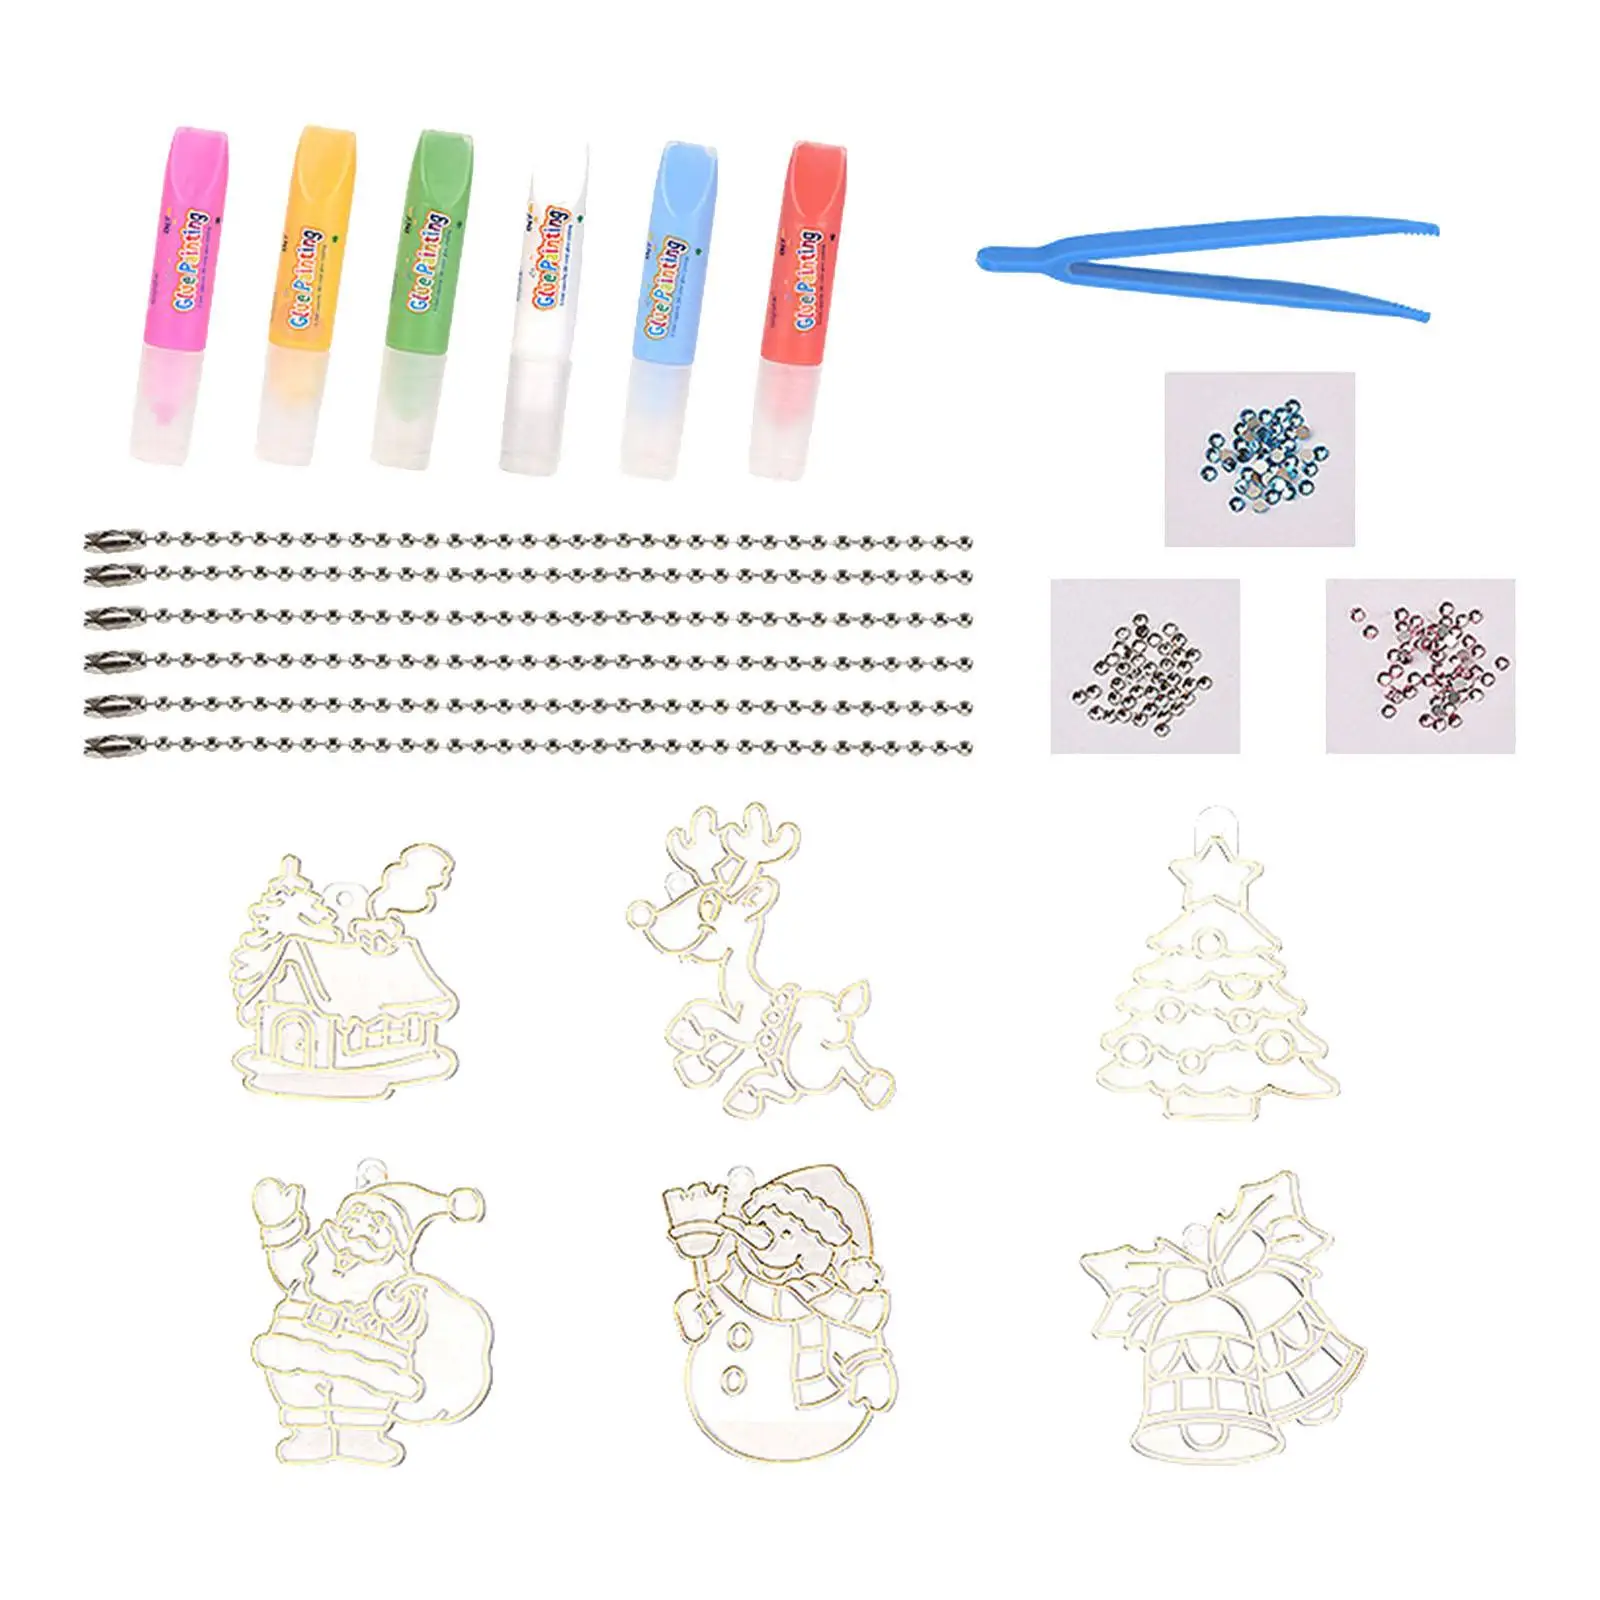 DIY Crystal Paint Arts and Crafts Set Painted Decorate Graffiti Crystal Art Paint Set for Boys Girls Adults Kids Birthday Gifts